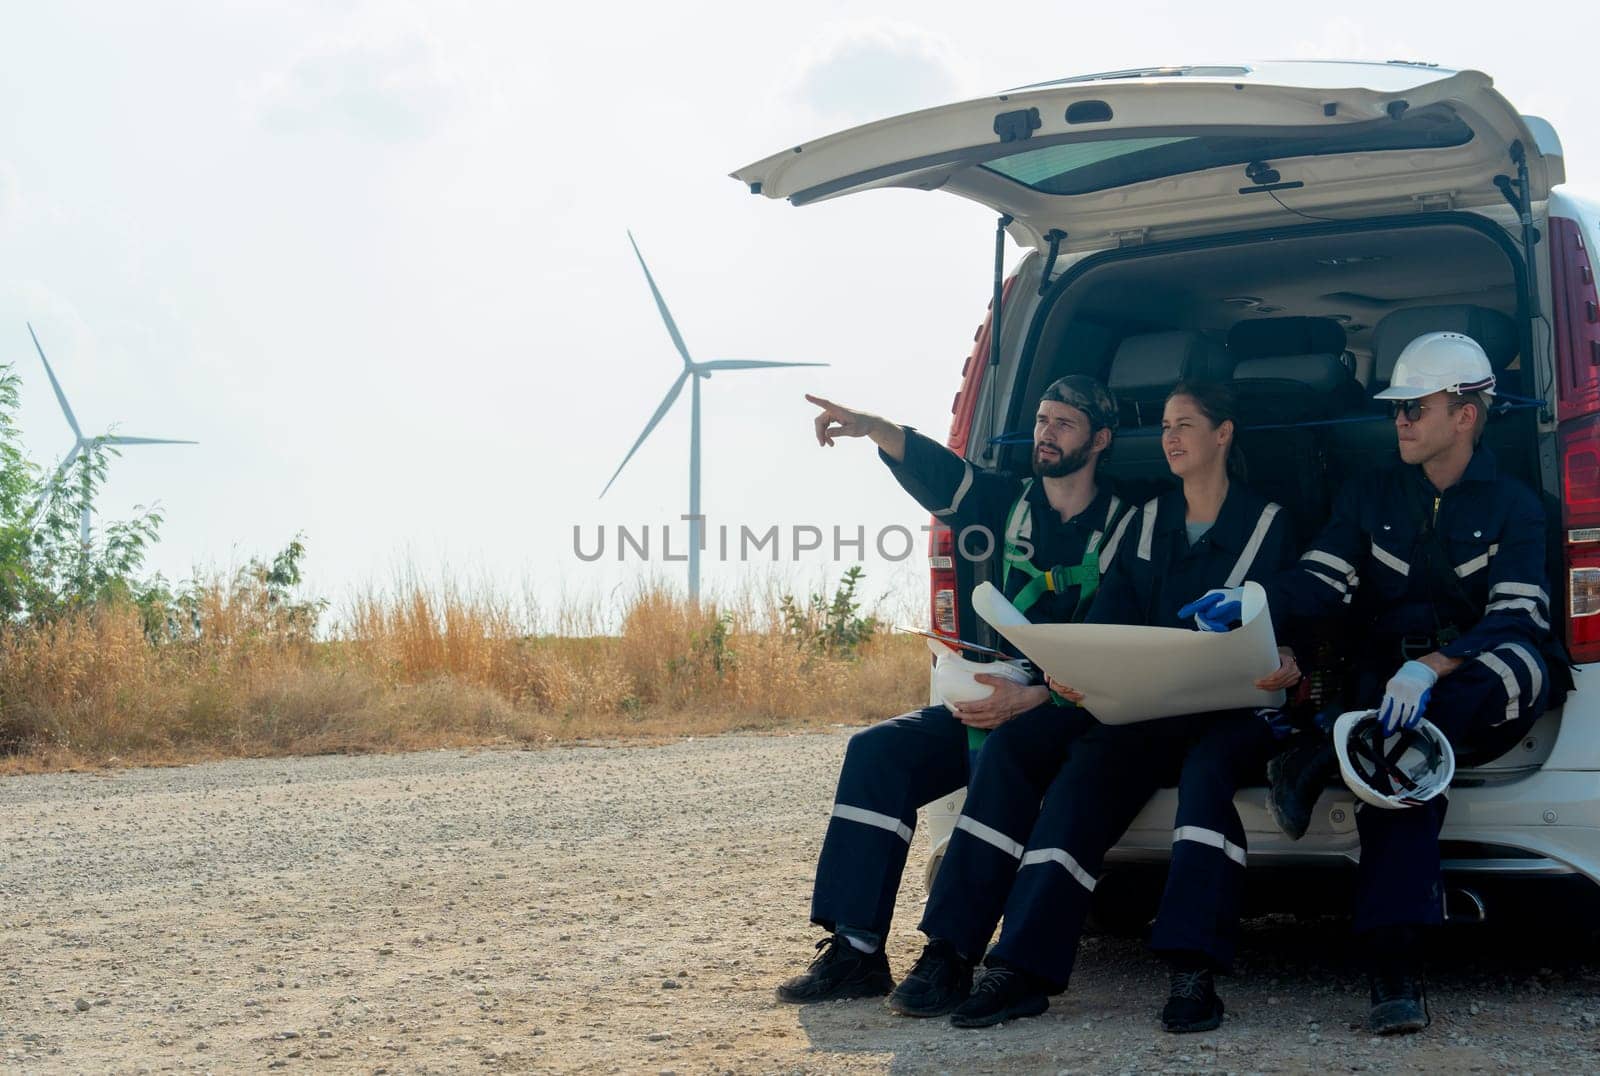 Side view group of technician workers sit on back of van and discuss about work in plan paper on the road with windmill or wind turbine on the background.